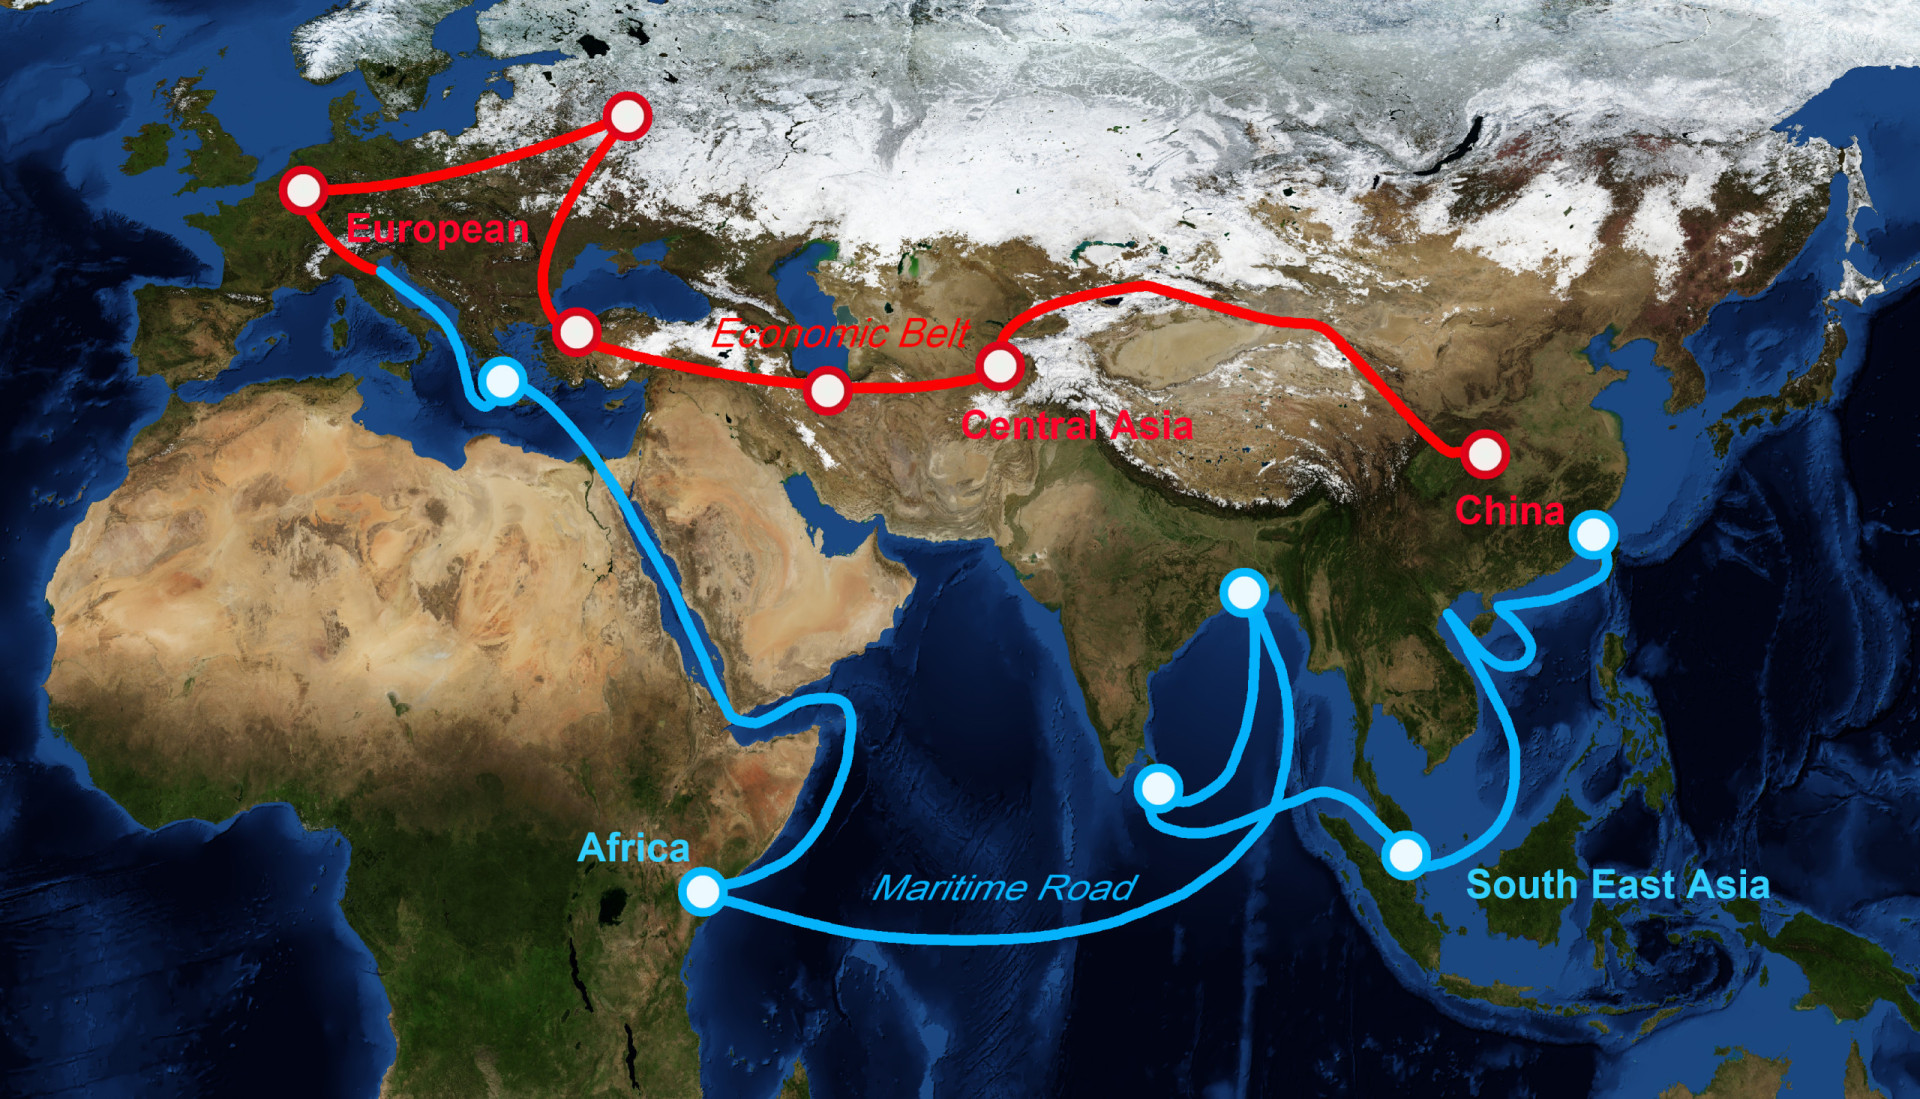 Interesting Facts About Marco Polo That You Might Not Be Aware Of